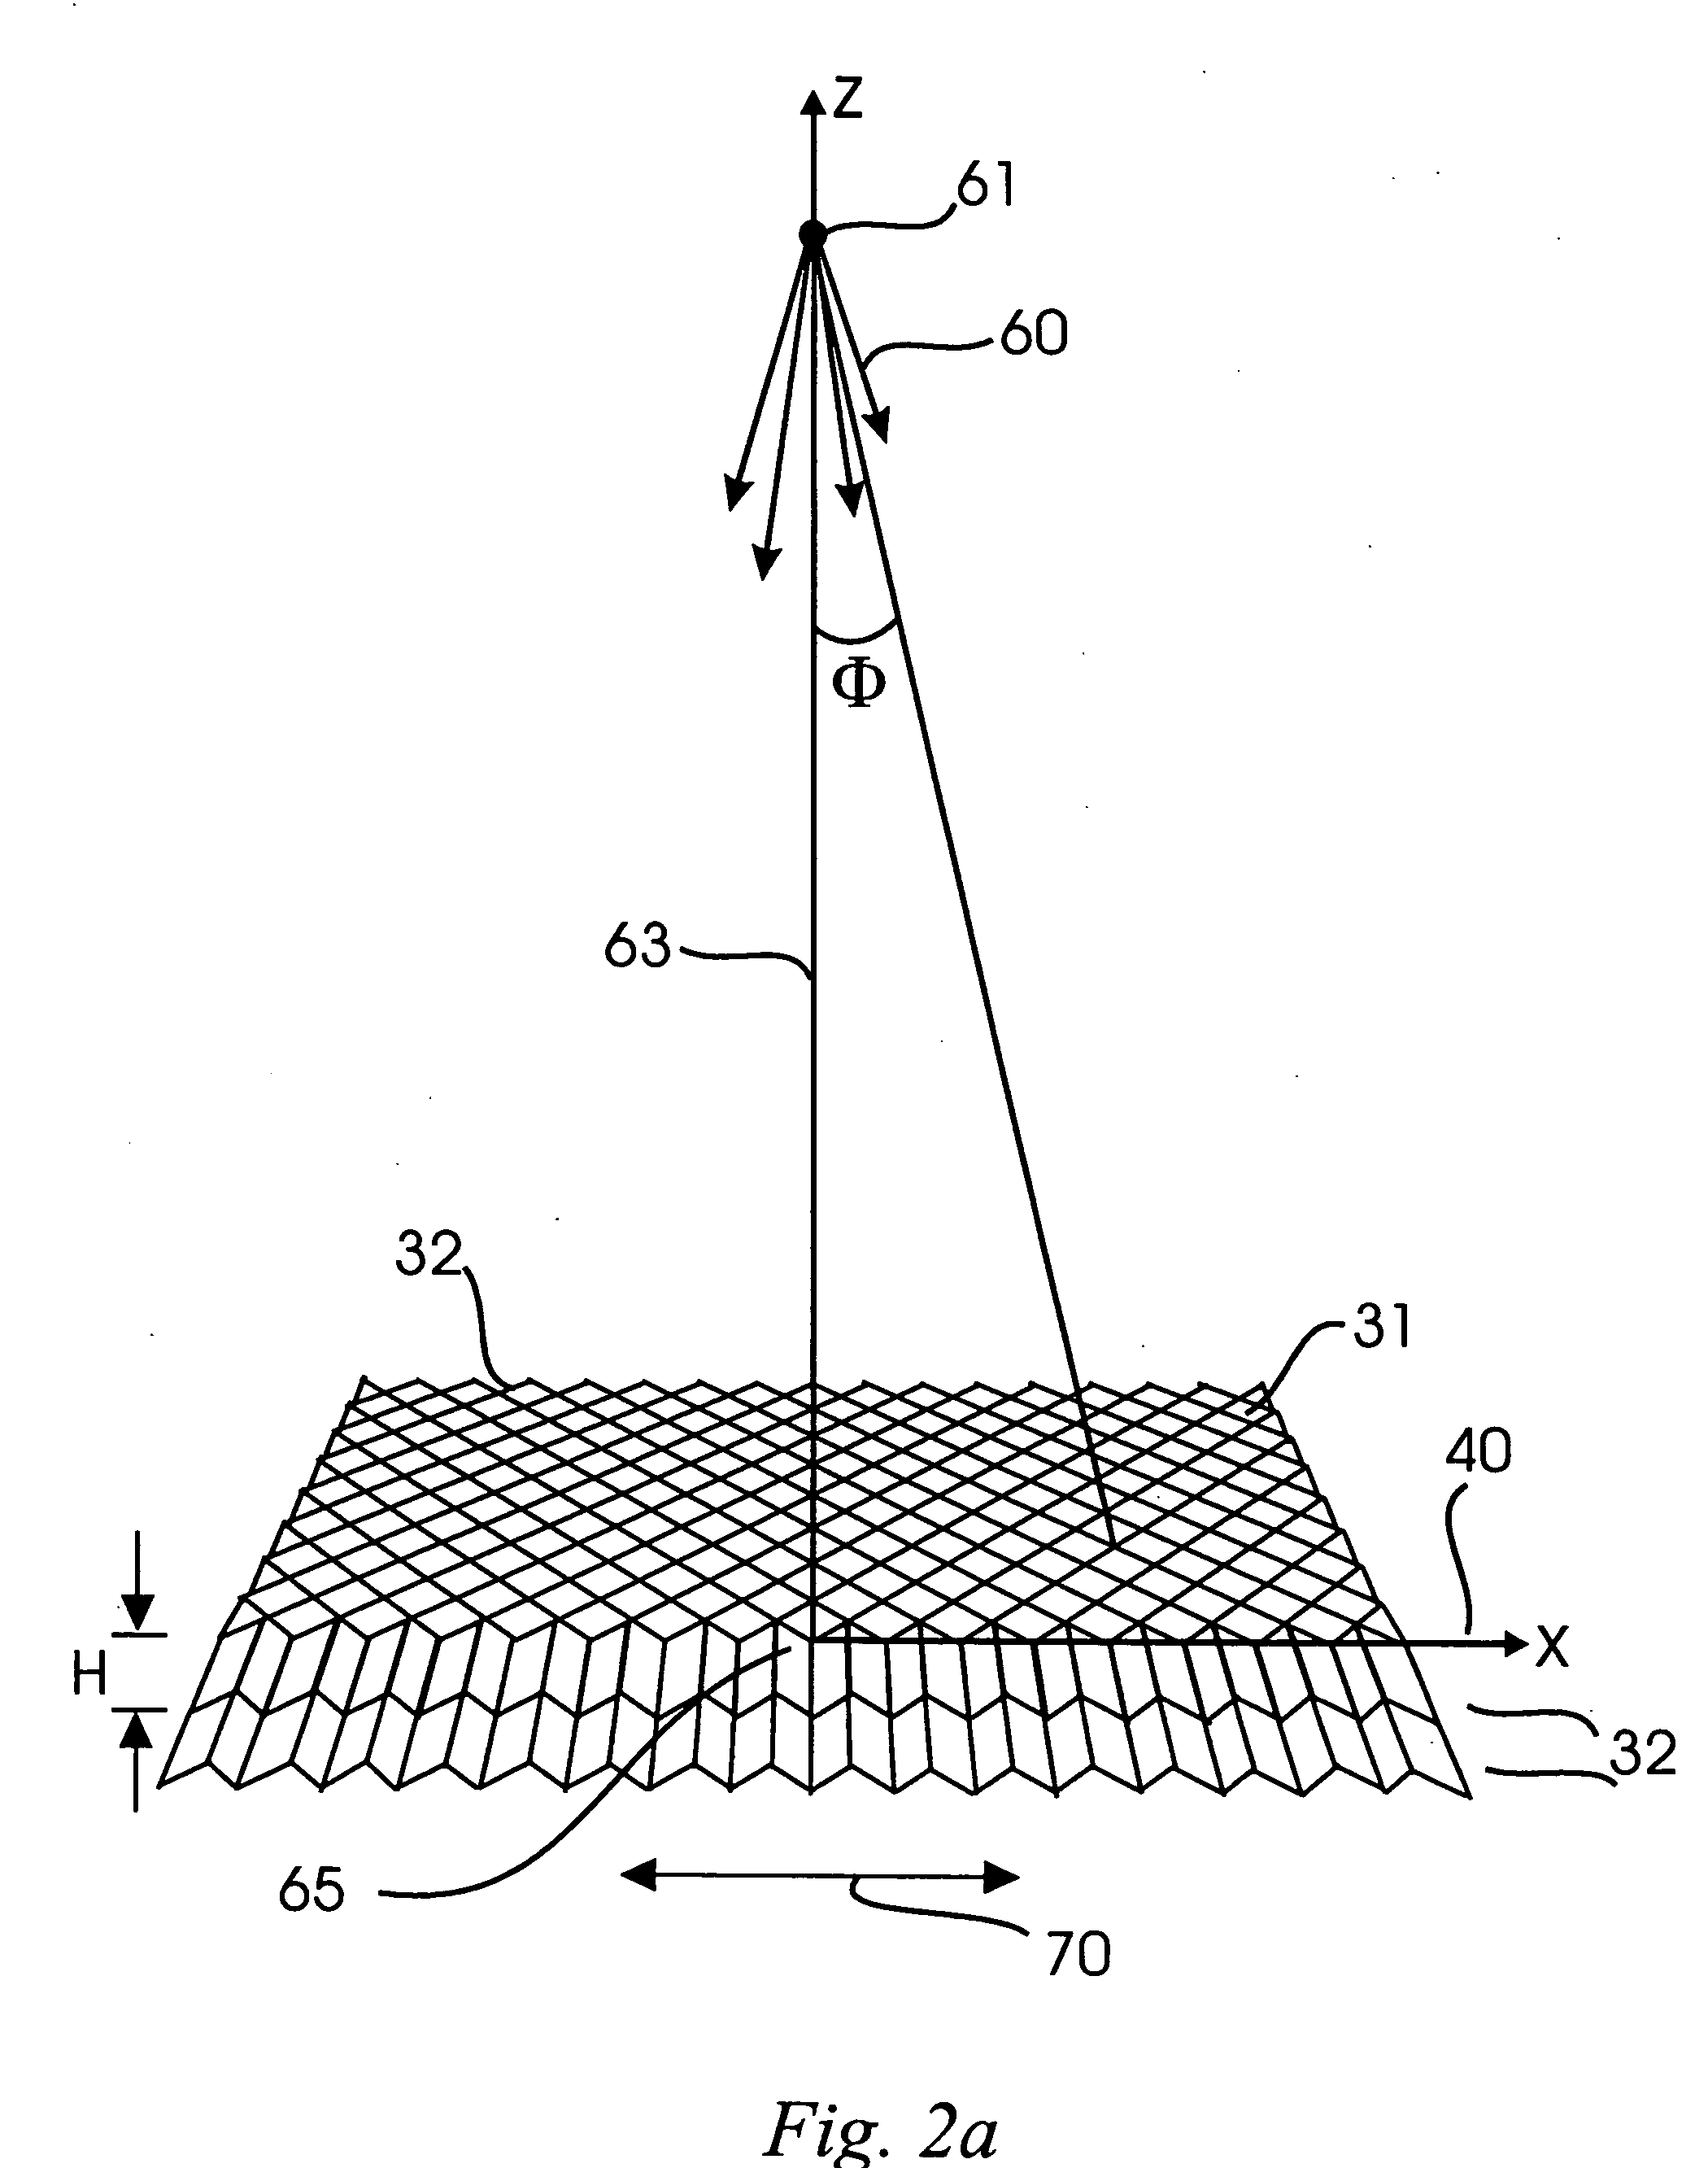 Anti-scatter grids and collimator designs, and their motion, fabrication and assembly